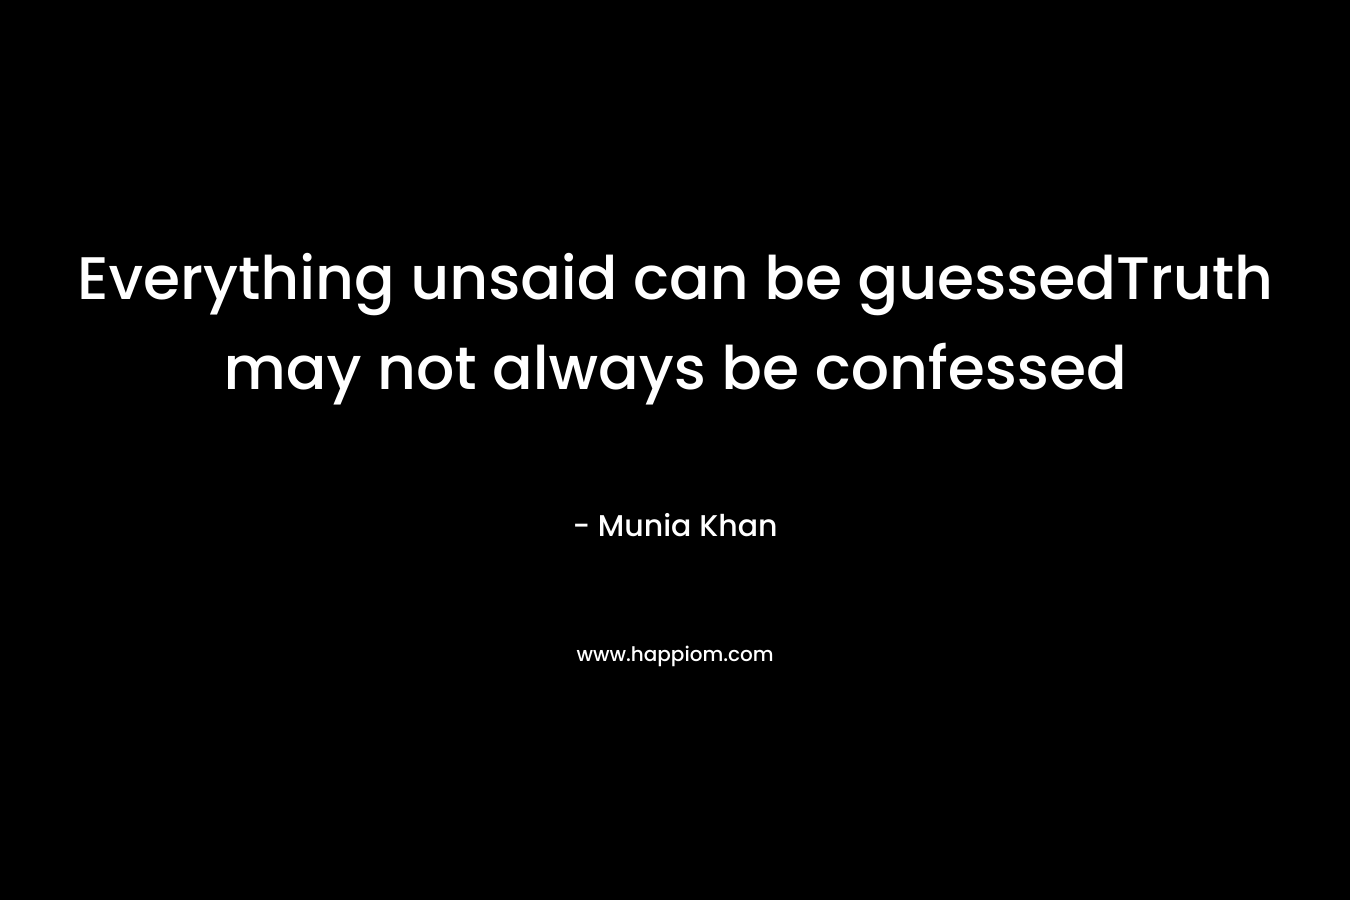 Everything unsaid can be guessedTruth may not always be confessed